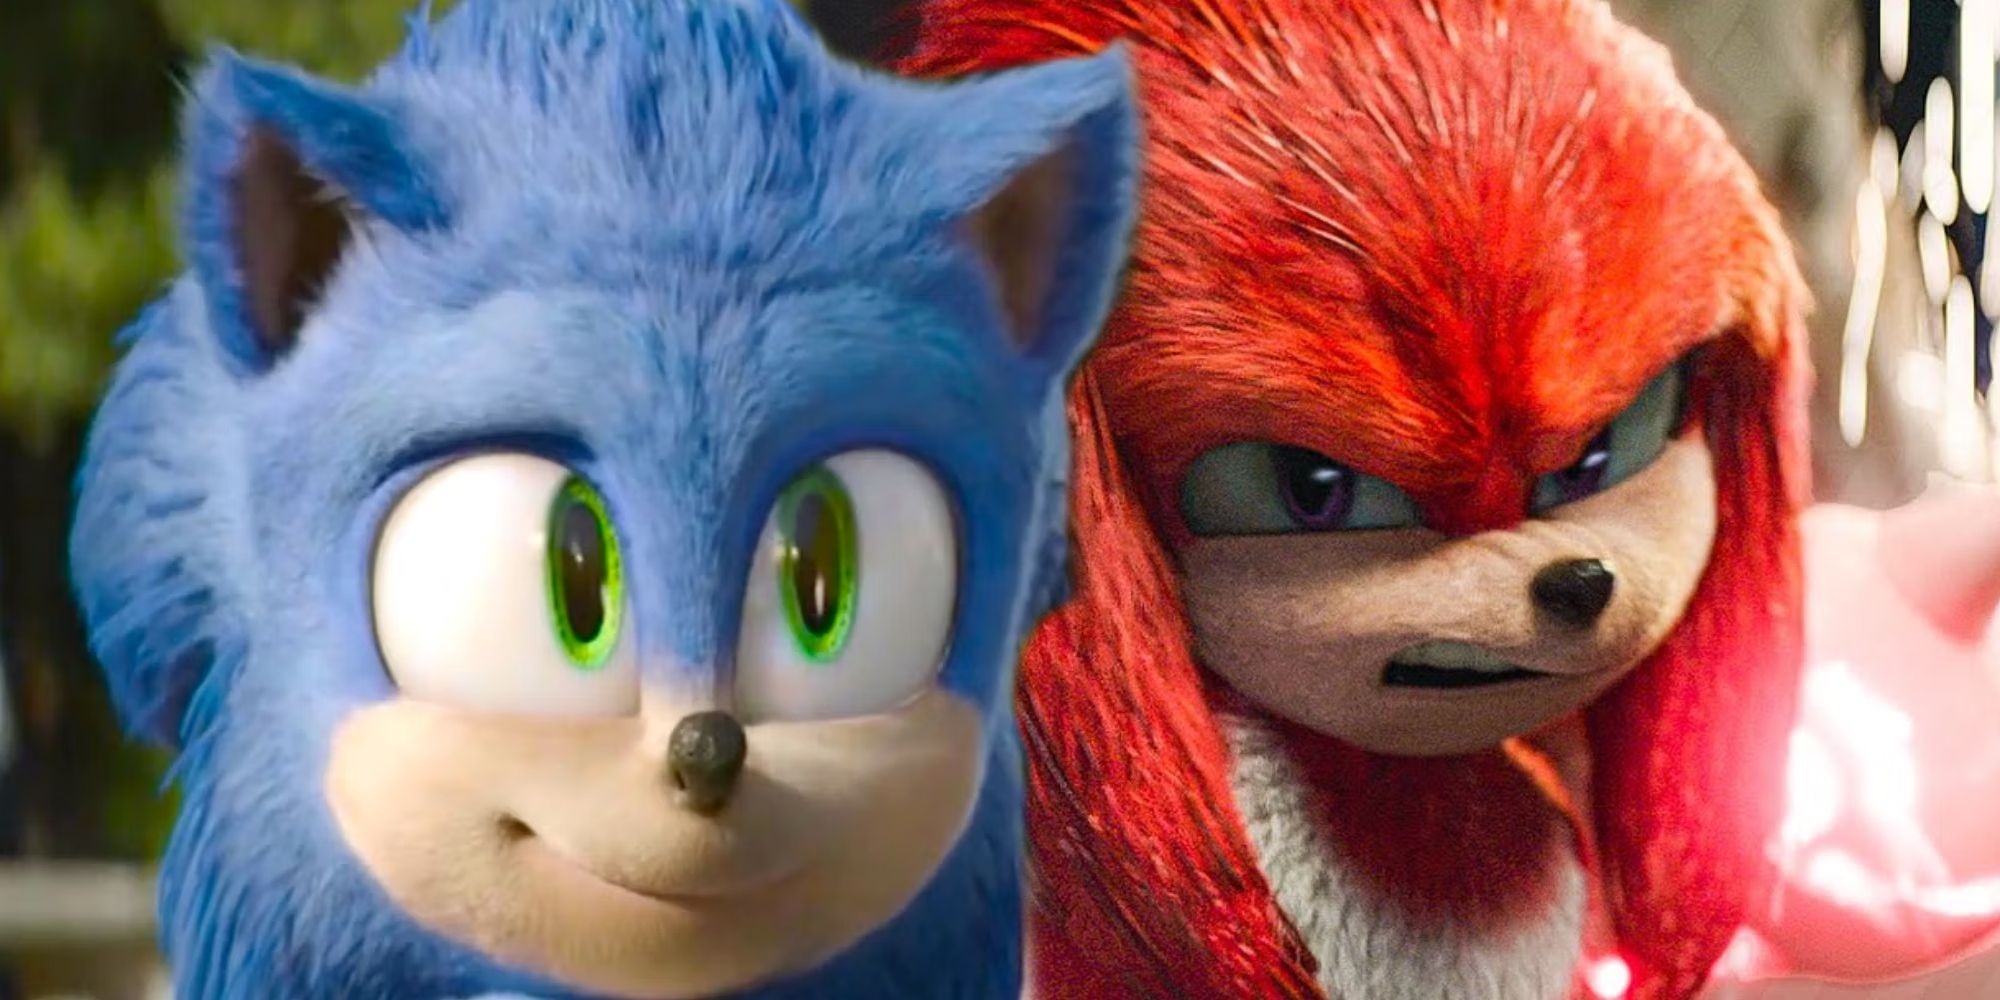 Sonic smiling next to Knuckles pulling back his fist in Sonic the Hedgehog 2